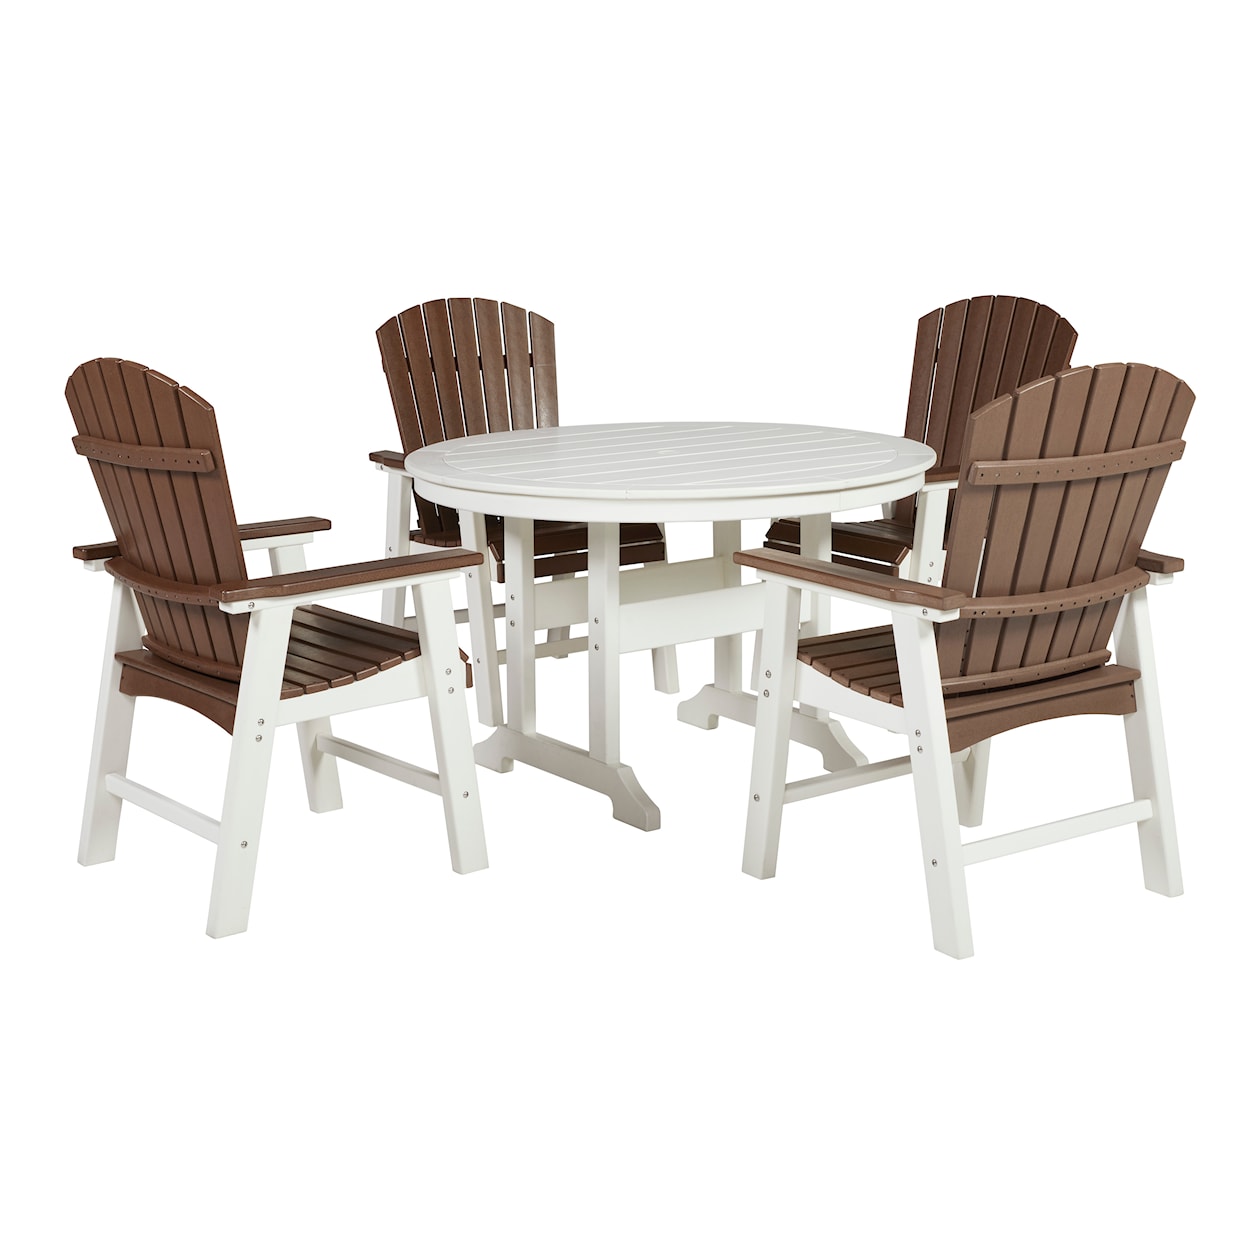 Ashley Signature Design Crescent Luxe 1xp207 615 2xp212 601a 5 Piece Dining Set Dunk And Bright